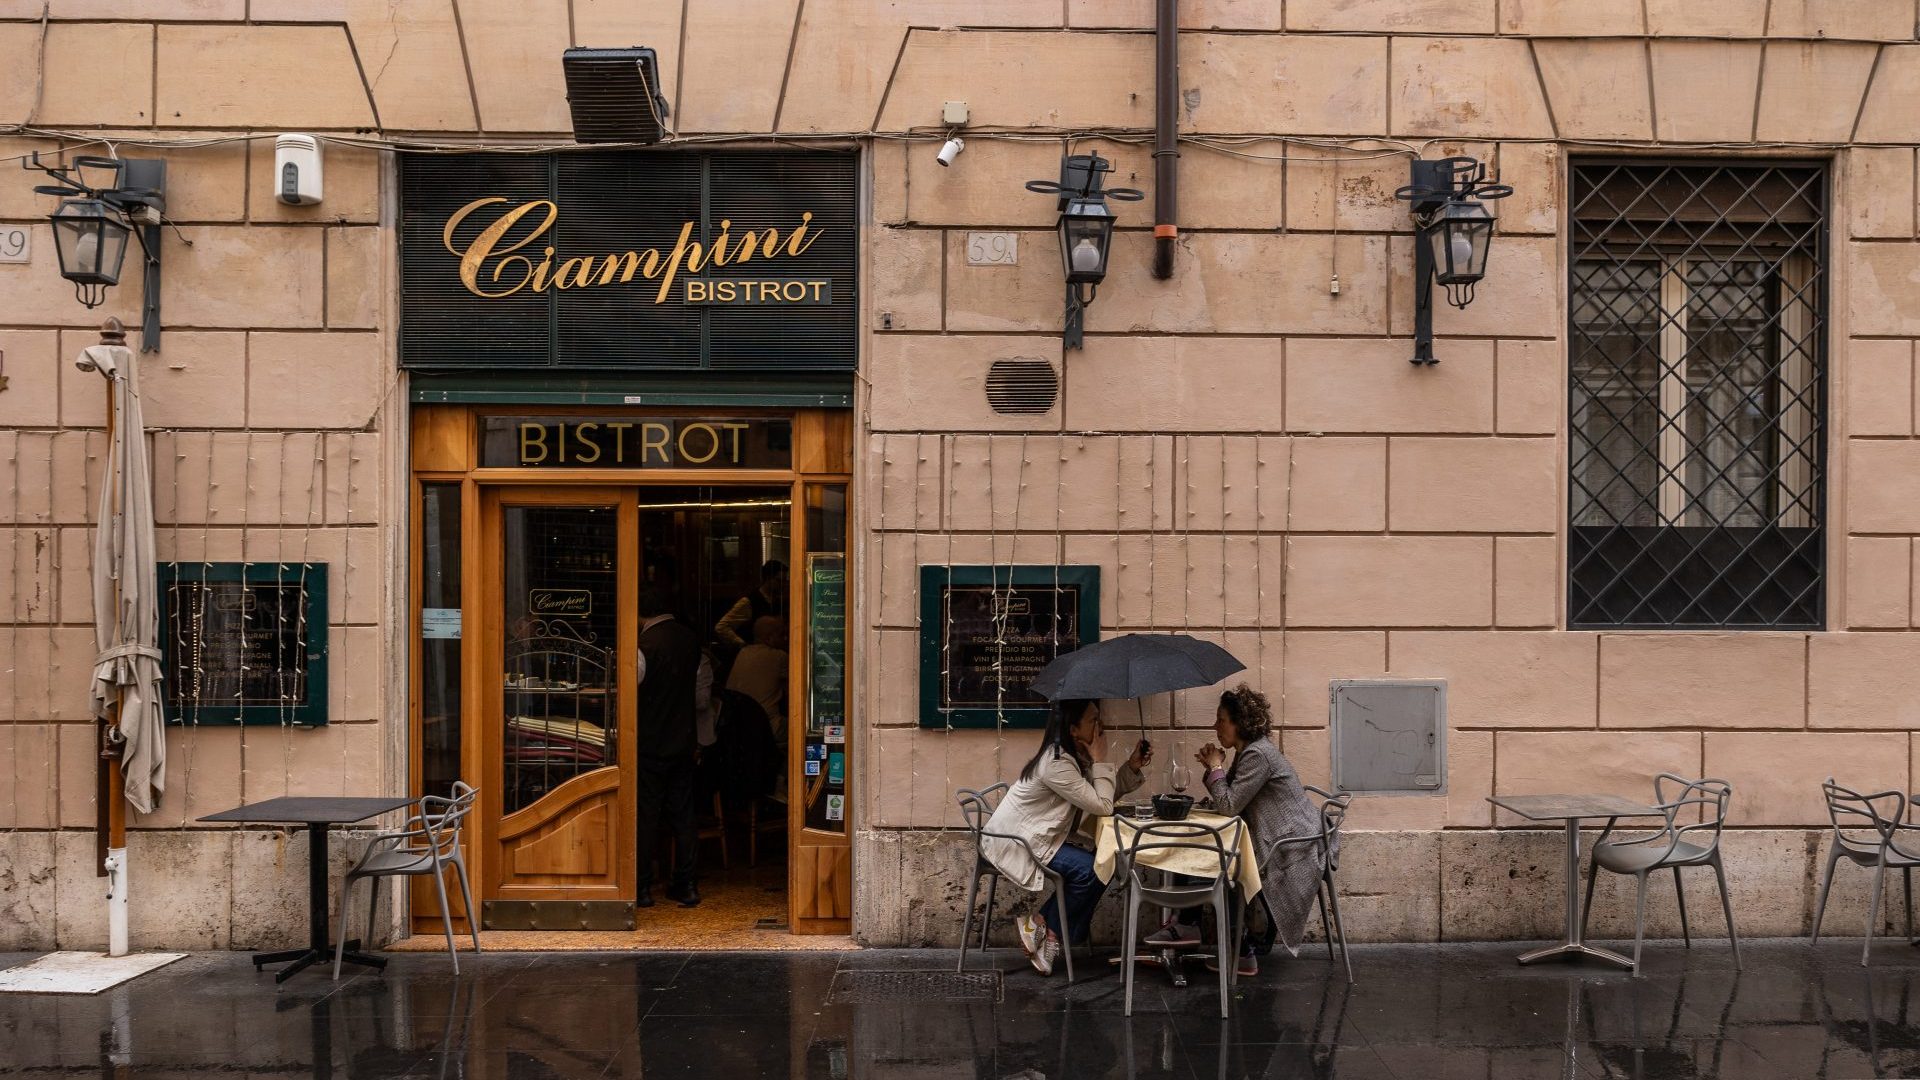 Two women sit at an outdoor table at a cafe in Rome, where they are unlikely to be discussing British politics. Photo: Emanuele Cremaschi/Getty